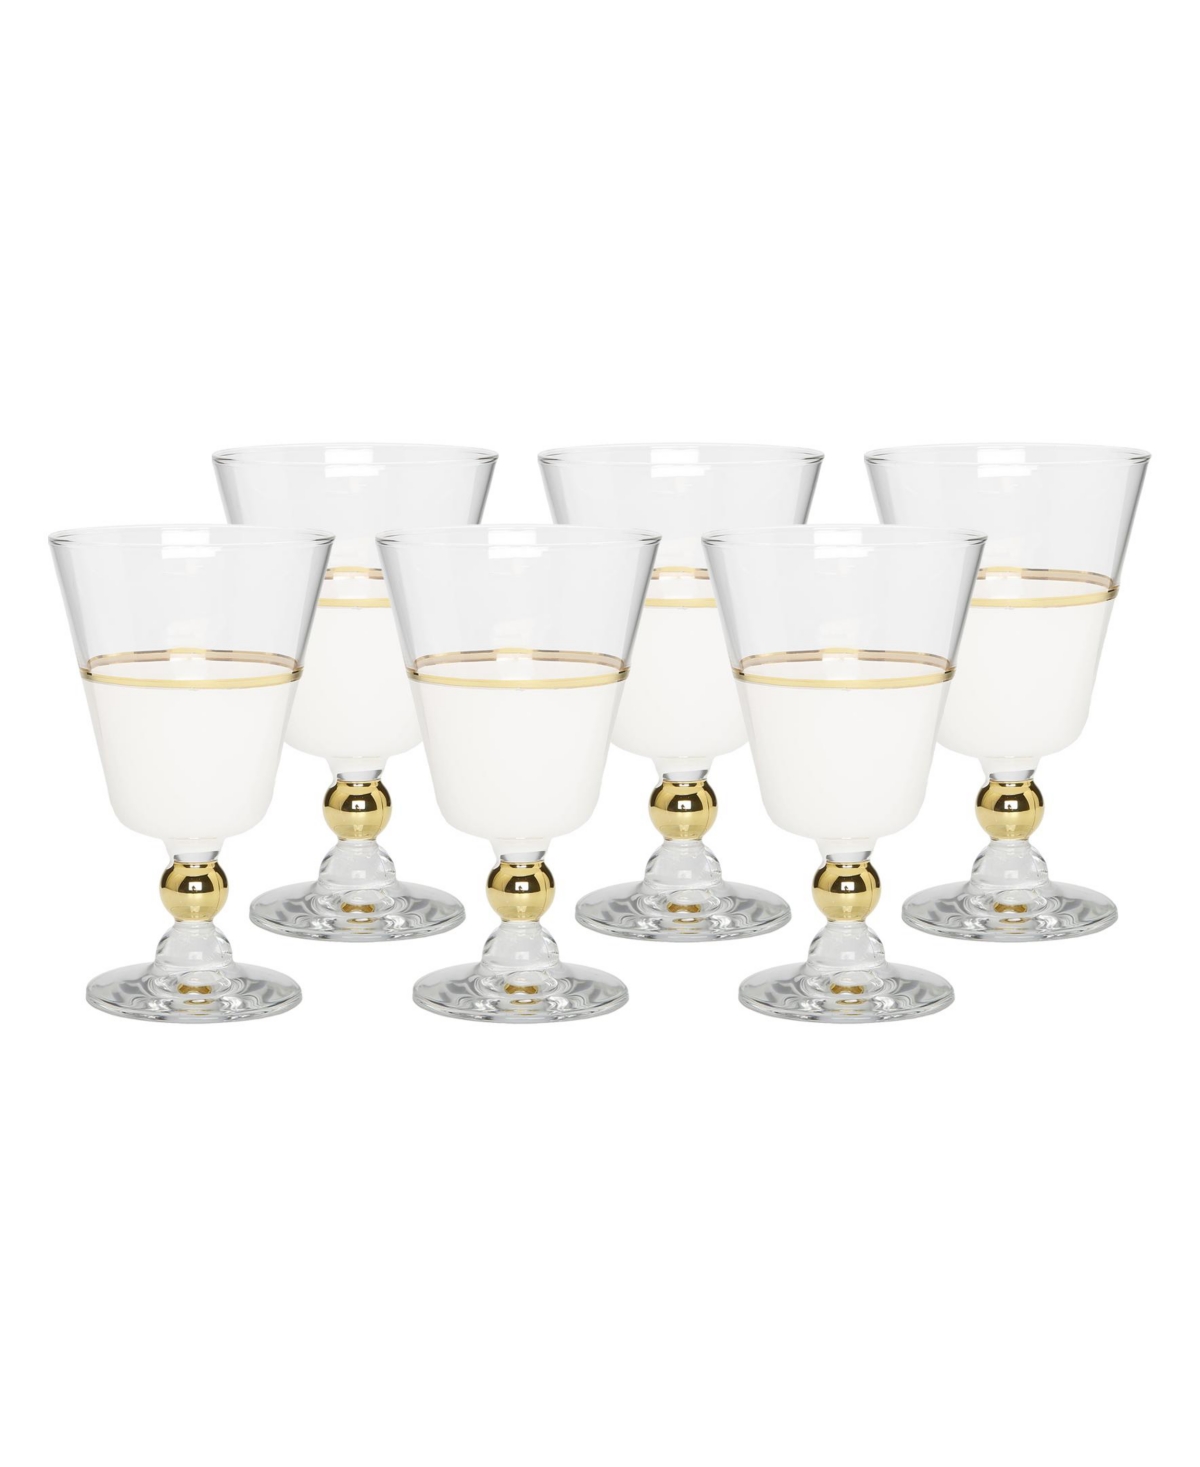 Classic Touch White Water Glasses With Trim And Stem, Set Of 6